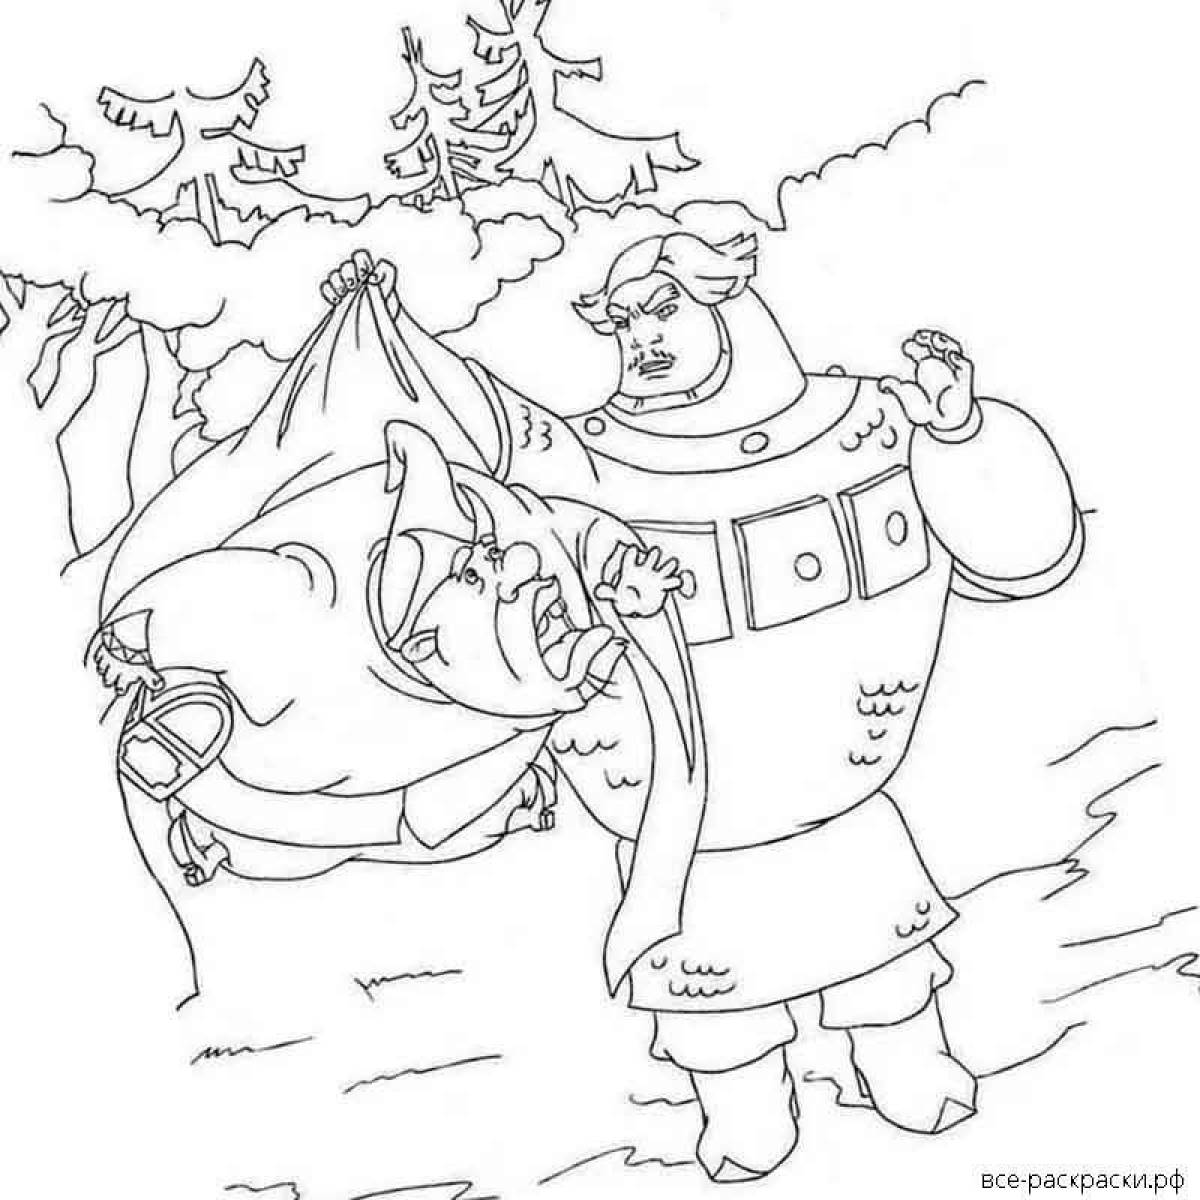 Charming coloring page 3 heroes